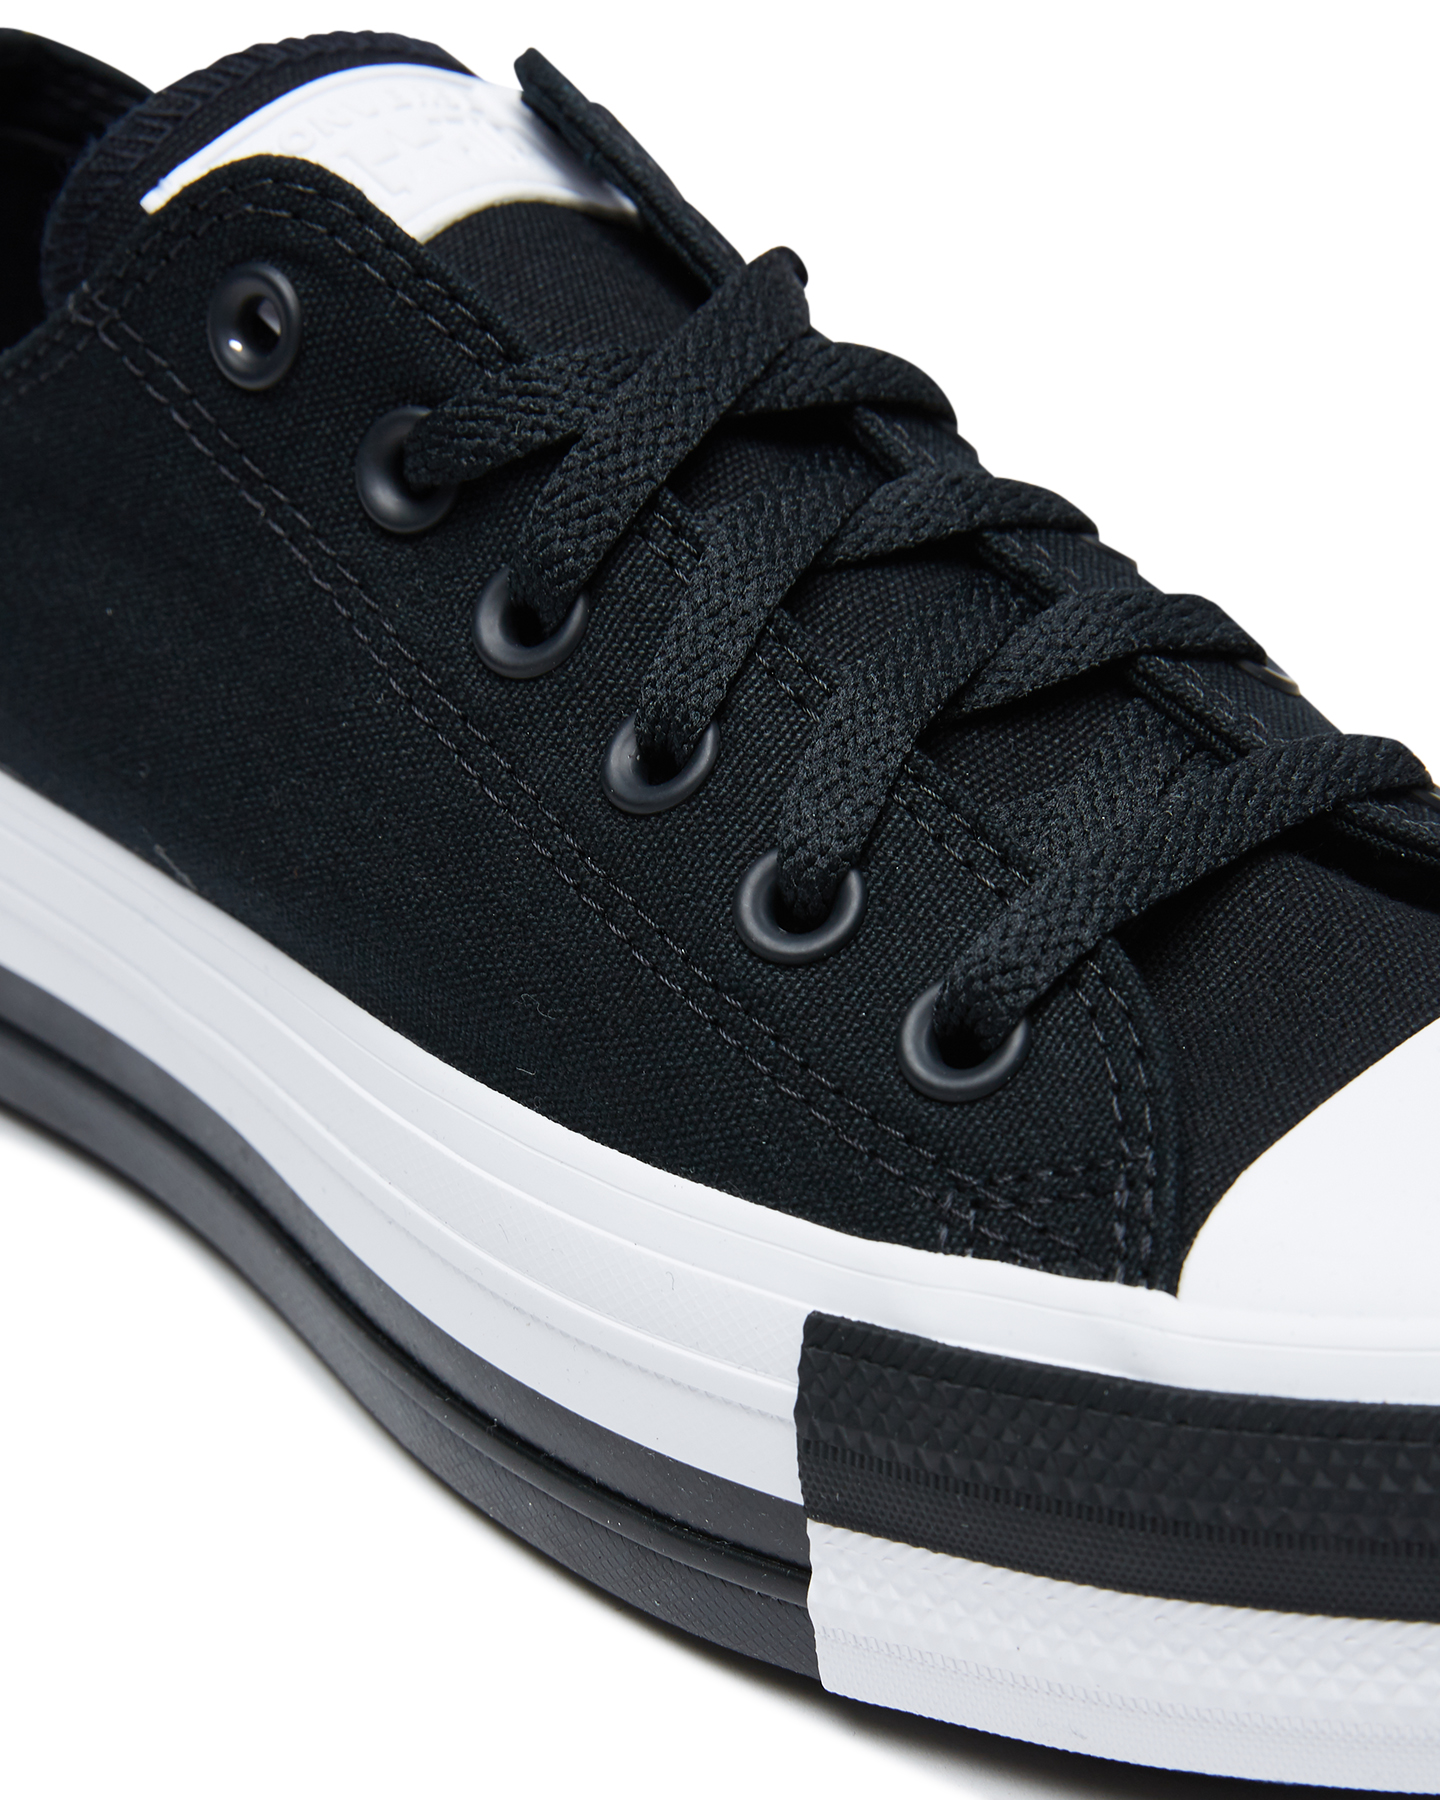 Converse Womens Chuck Taylor All Star Lo Lift Shoe Black Surfstitch